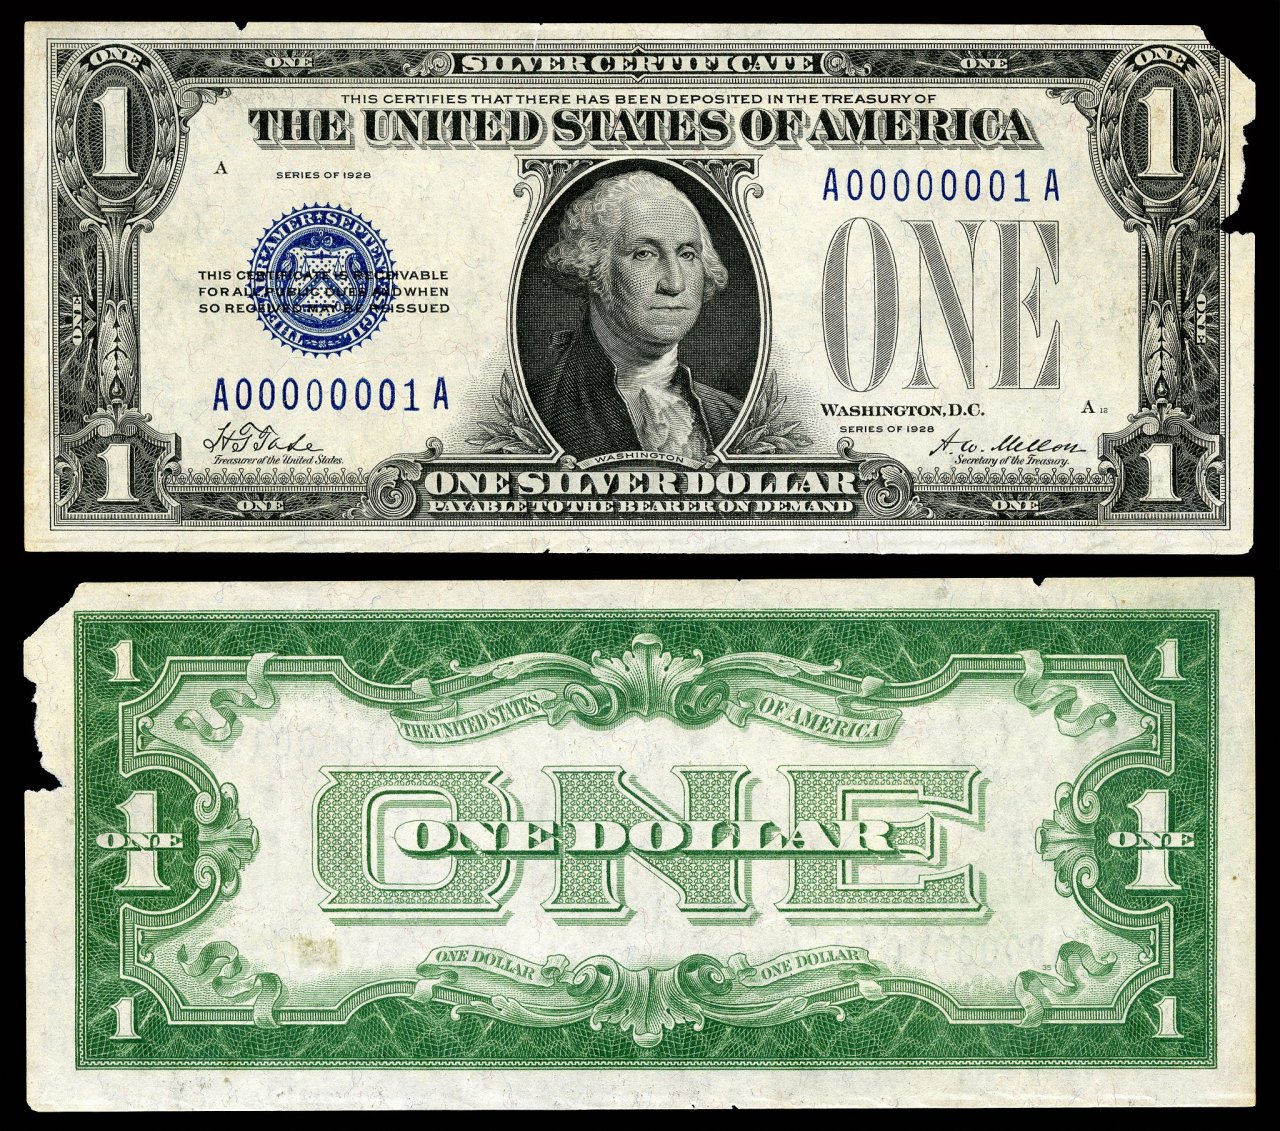 How Much Is A Silver Certificate Worth? | Artifact Collectors